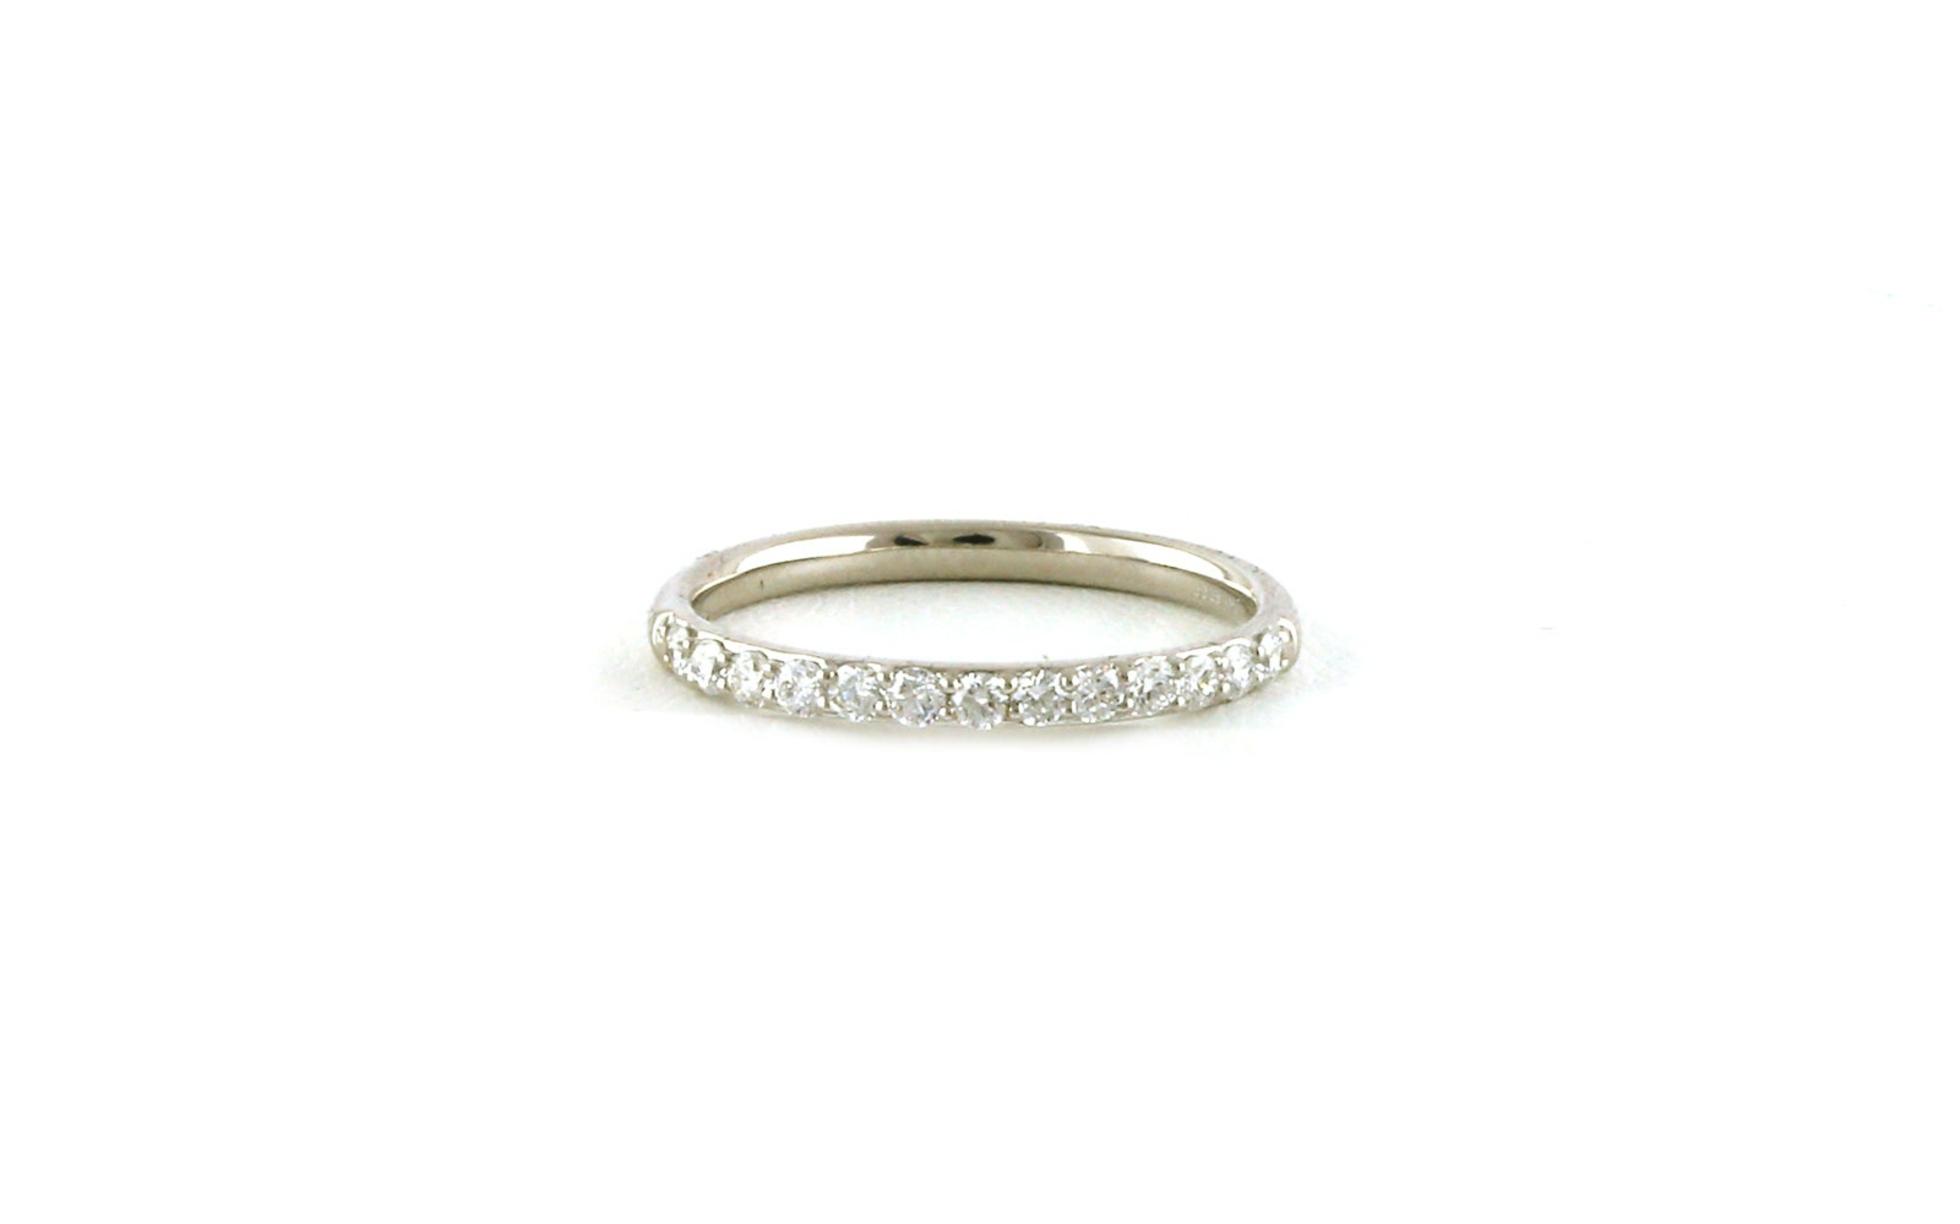 13-Stone Share-prong Diamond Wedding Band in White Gold (0.33cts TWT)